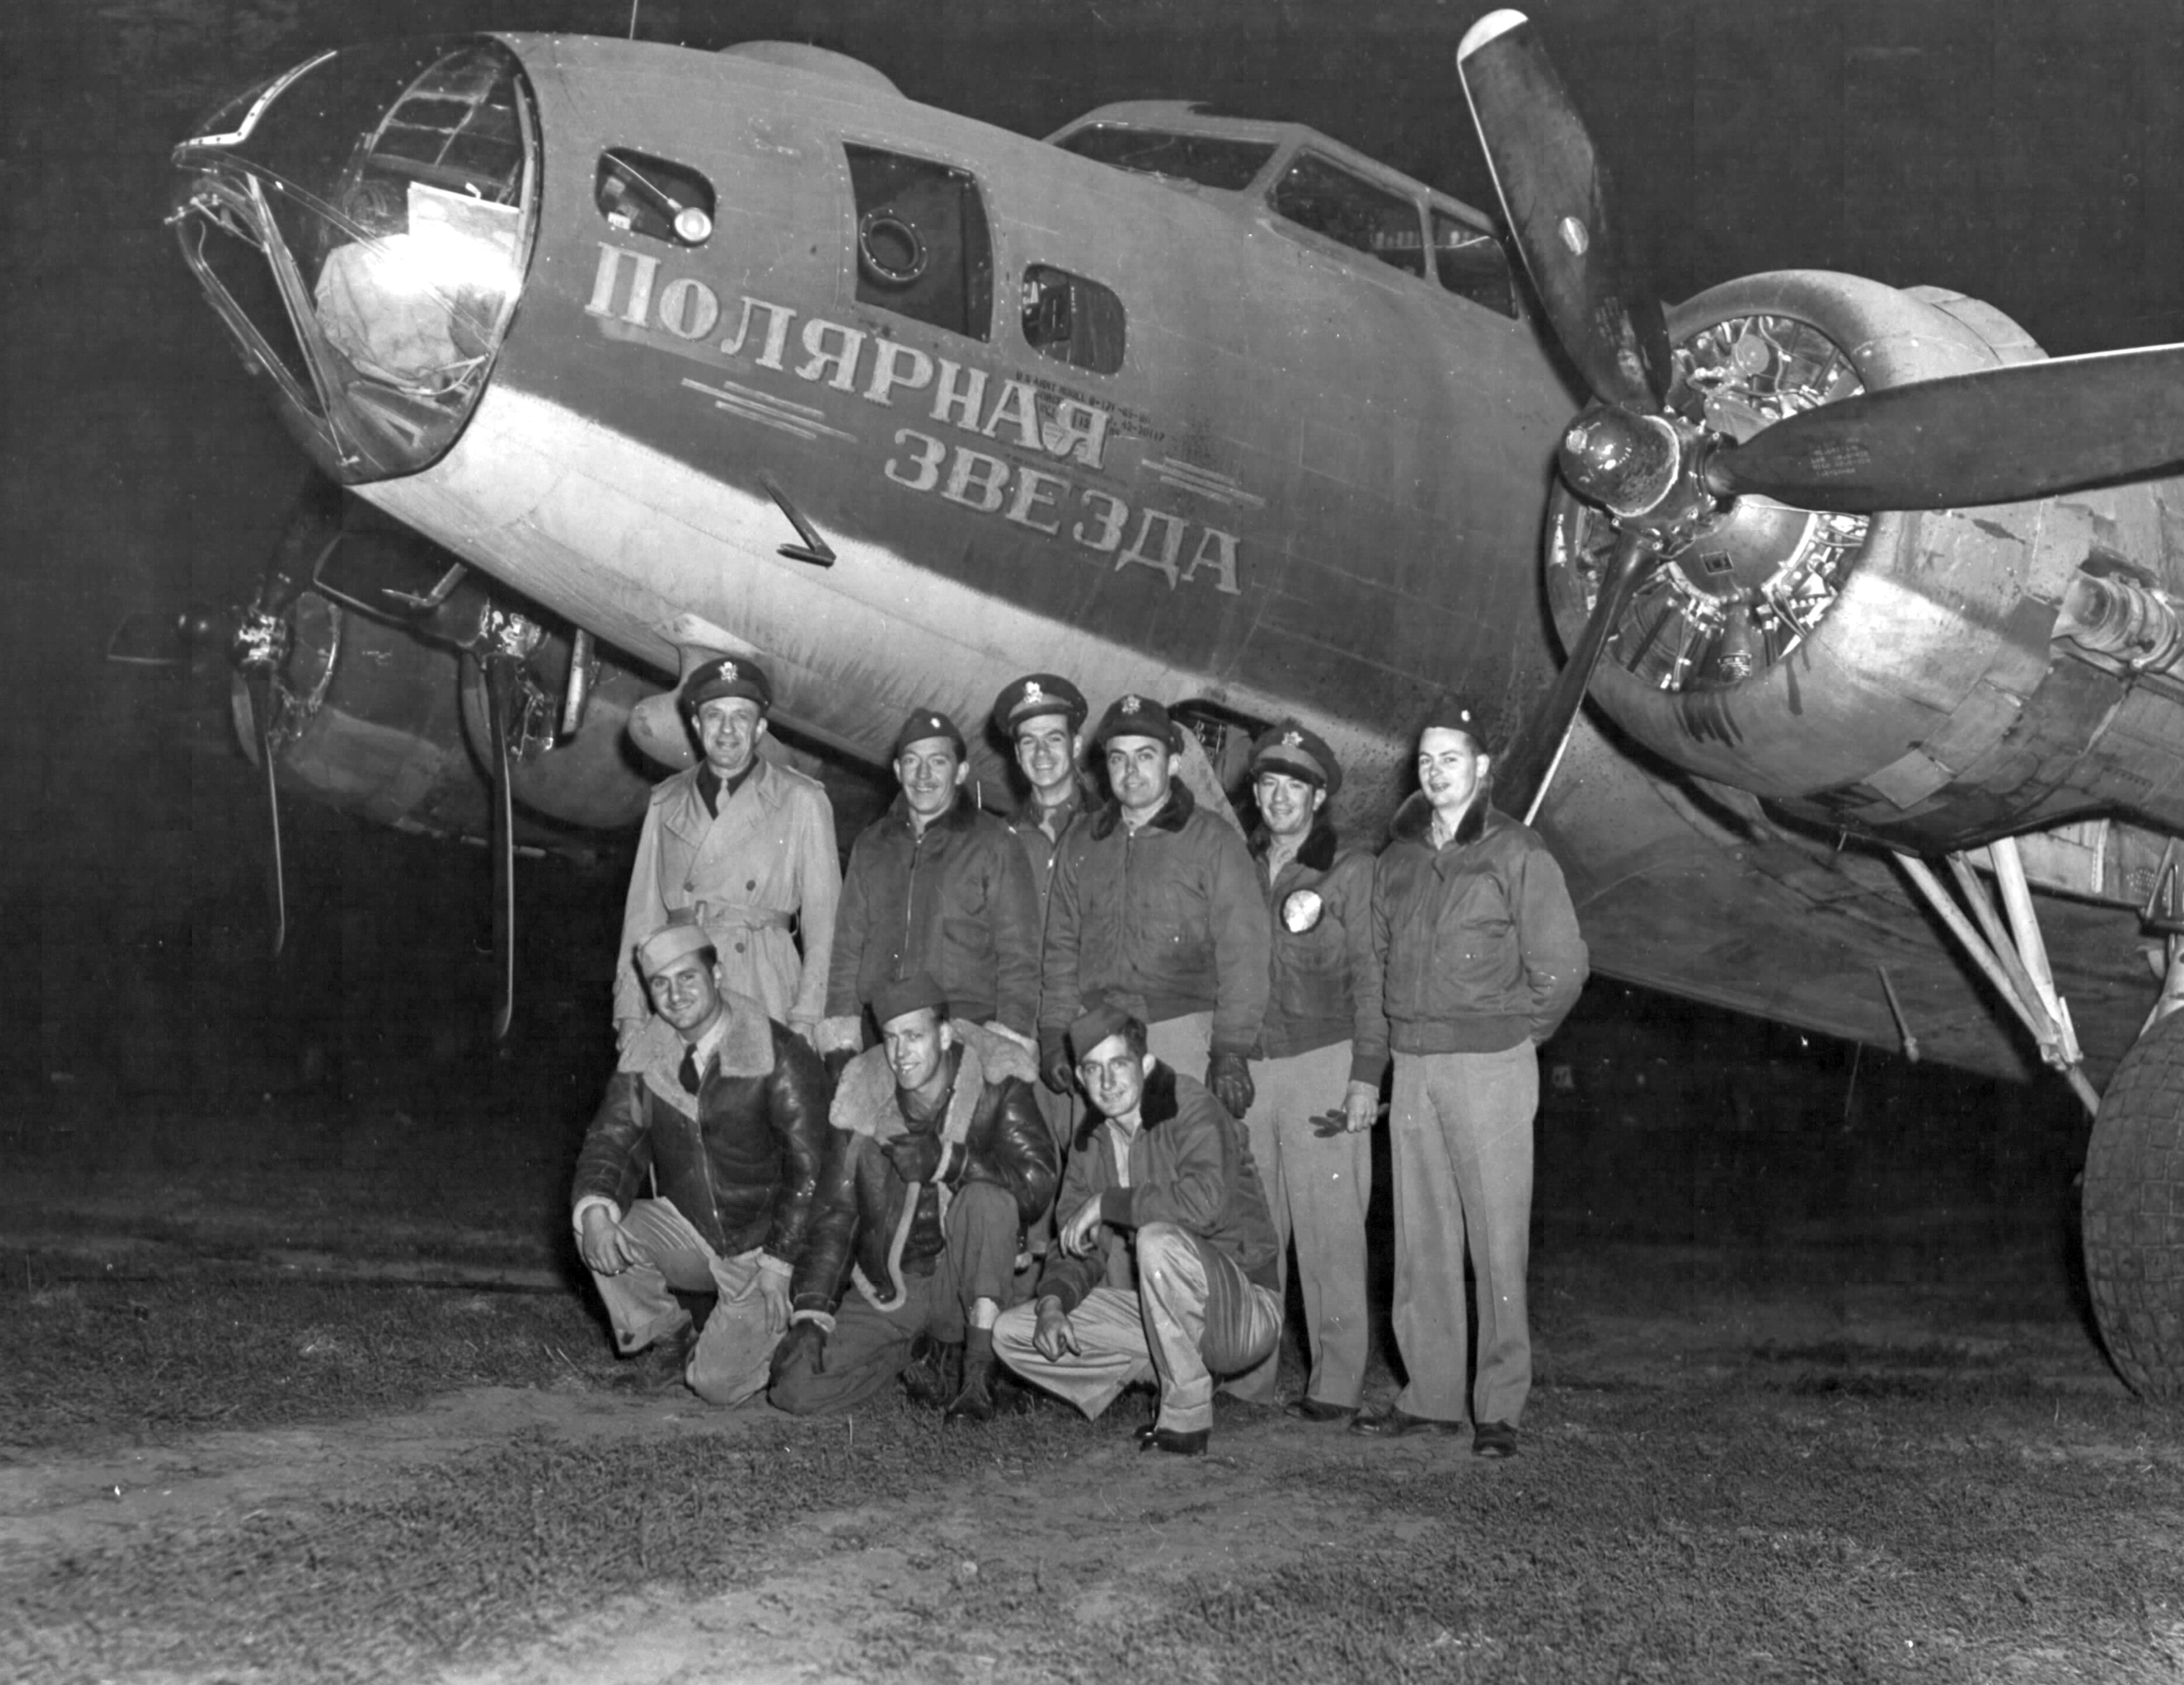 Crew of B-17F Fortress #42-30117 with the 95th Bomb Group posing in front of their airplane at Poltava, Ukraine during an Operation Frantic shuttle mission, summer 1944. The aircraft name translates to Polar Star.